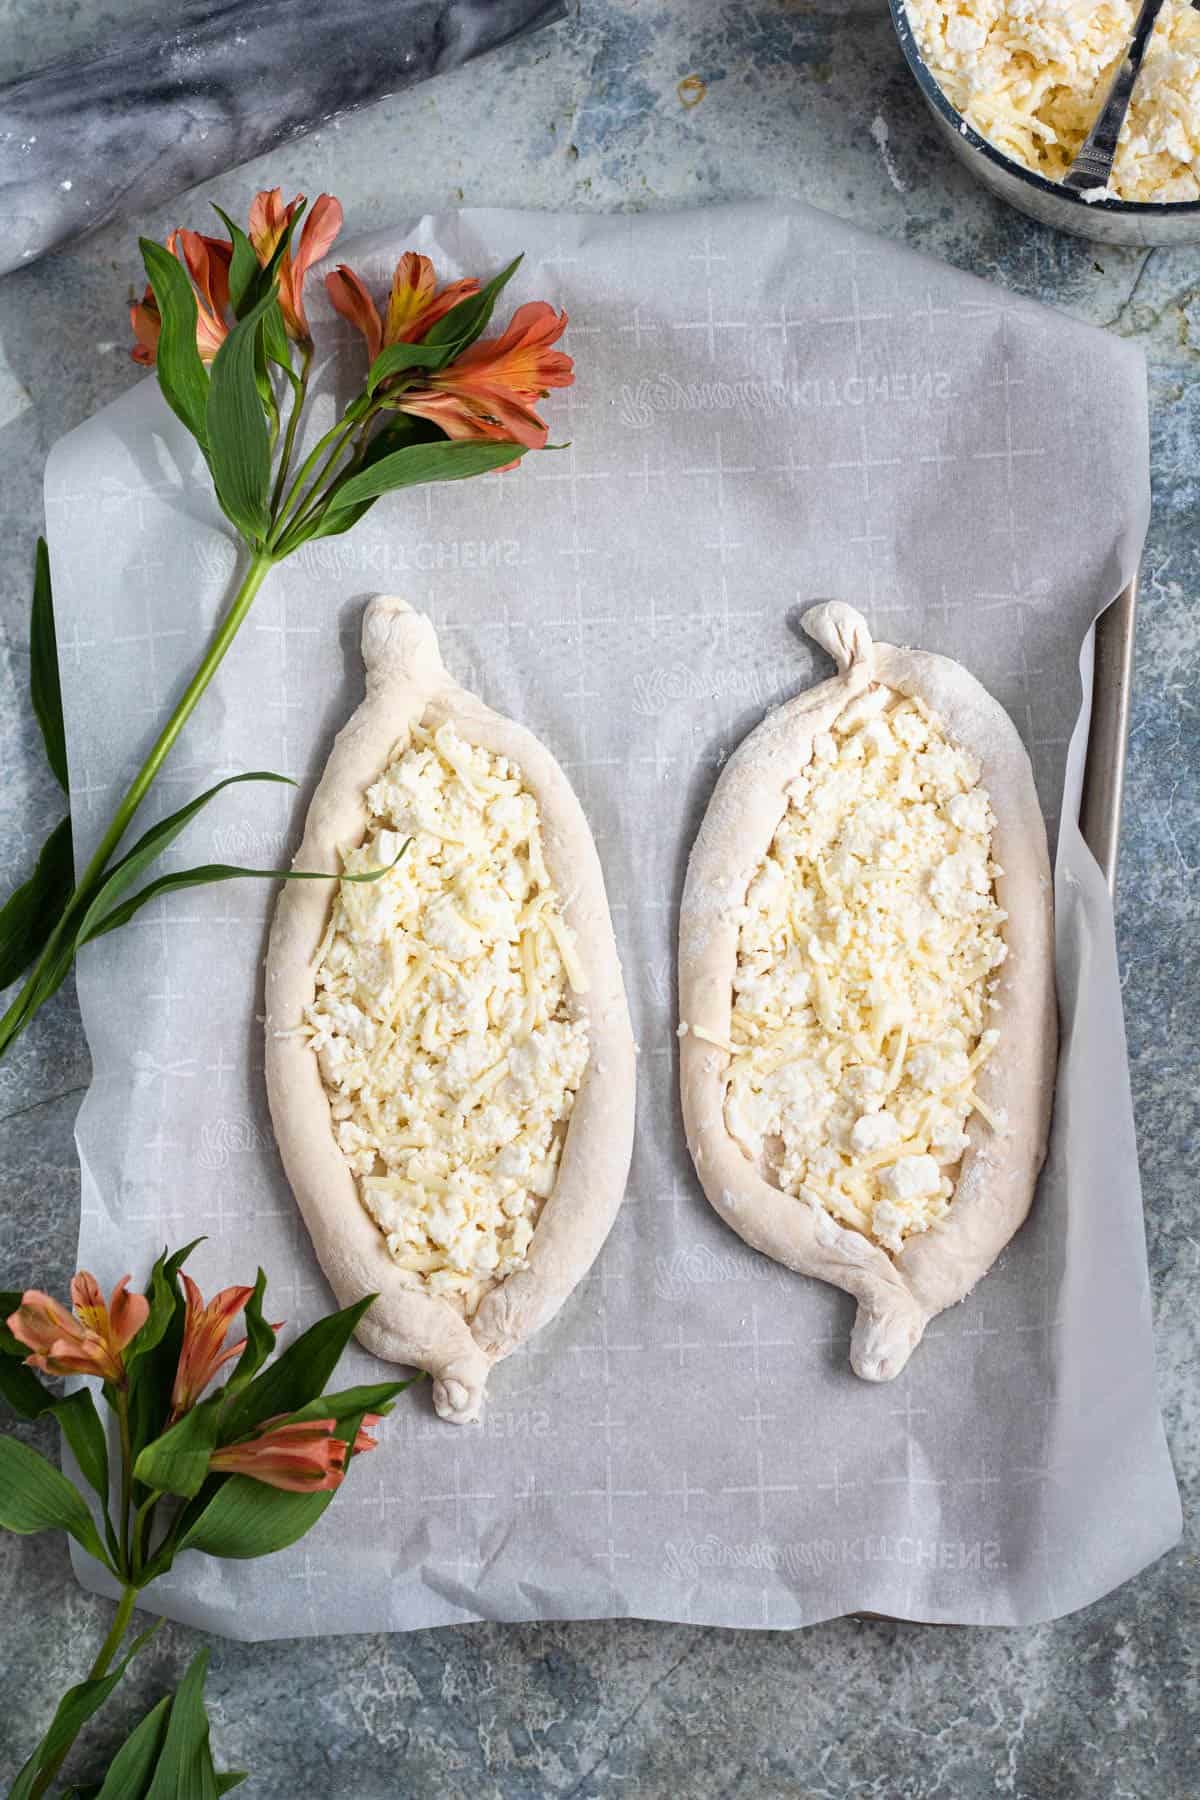 Dough rolled out and shaped to make khachapuri with cheese sprinkled in the middle surrounded by flowers.